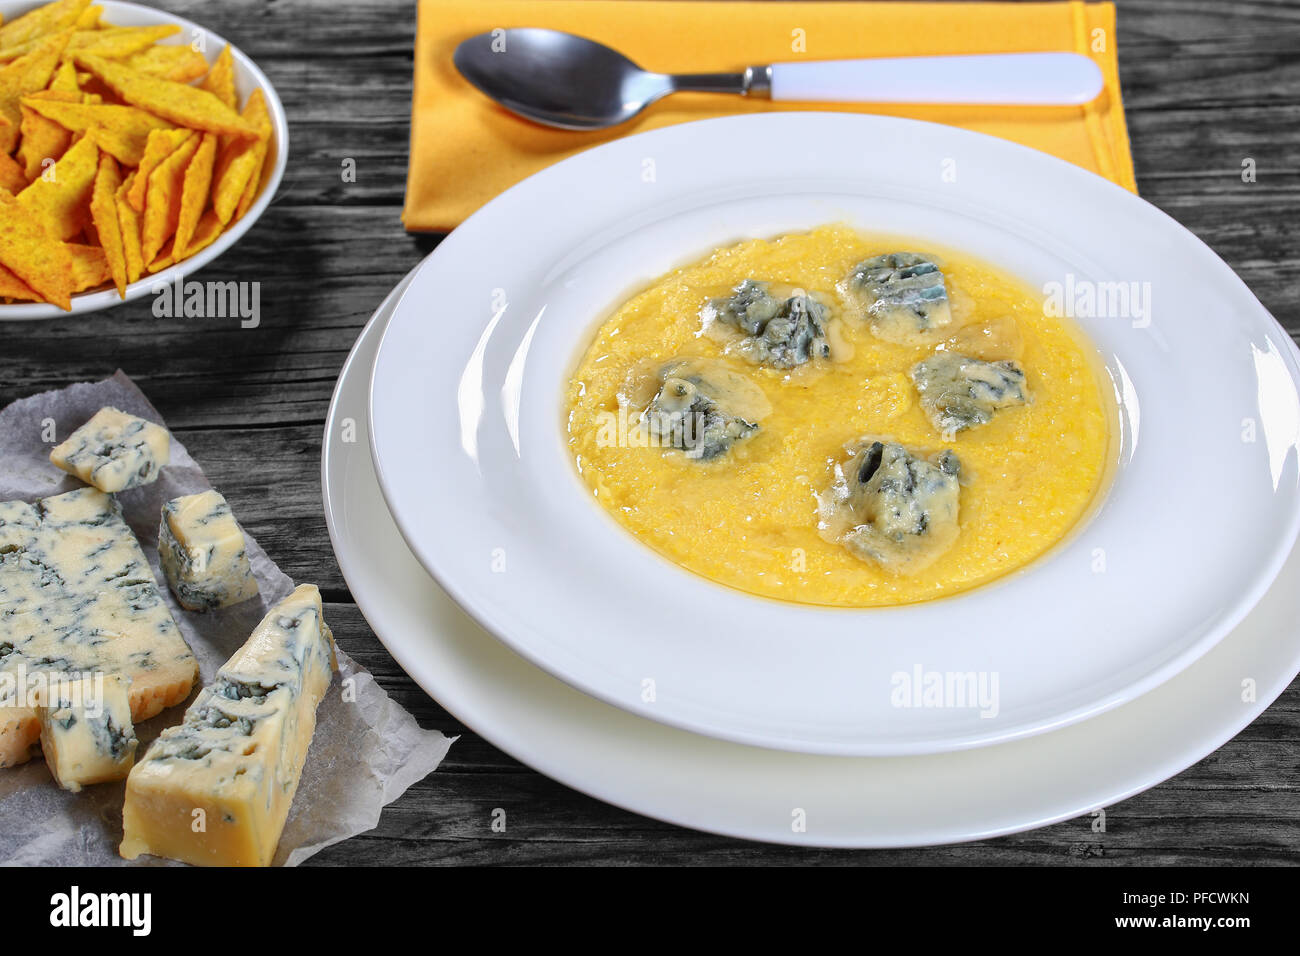 hot delicious creamy polenta with melted gorgonzola cheese on white plate with napkin and spoon. piece of gorgonzola on paper, saucer with cornmeal  s Stock Photo